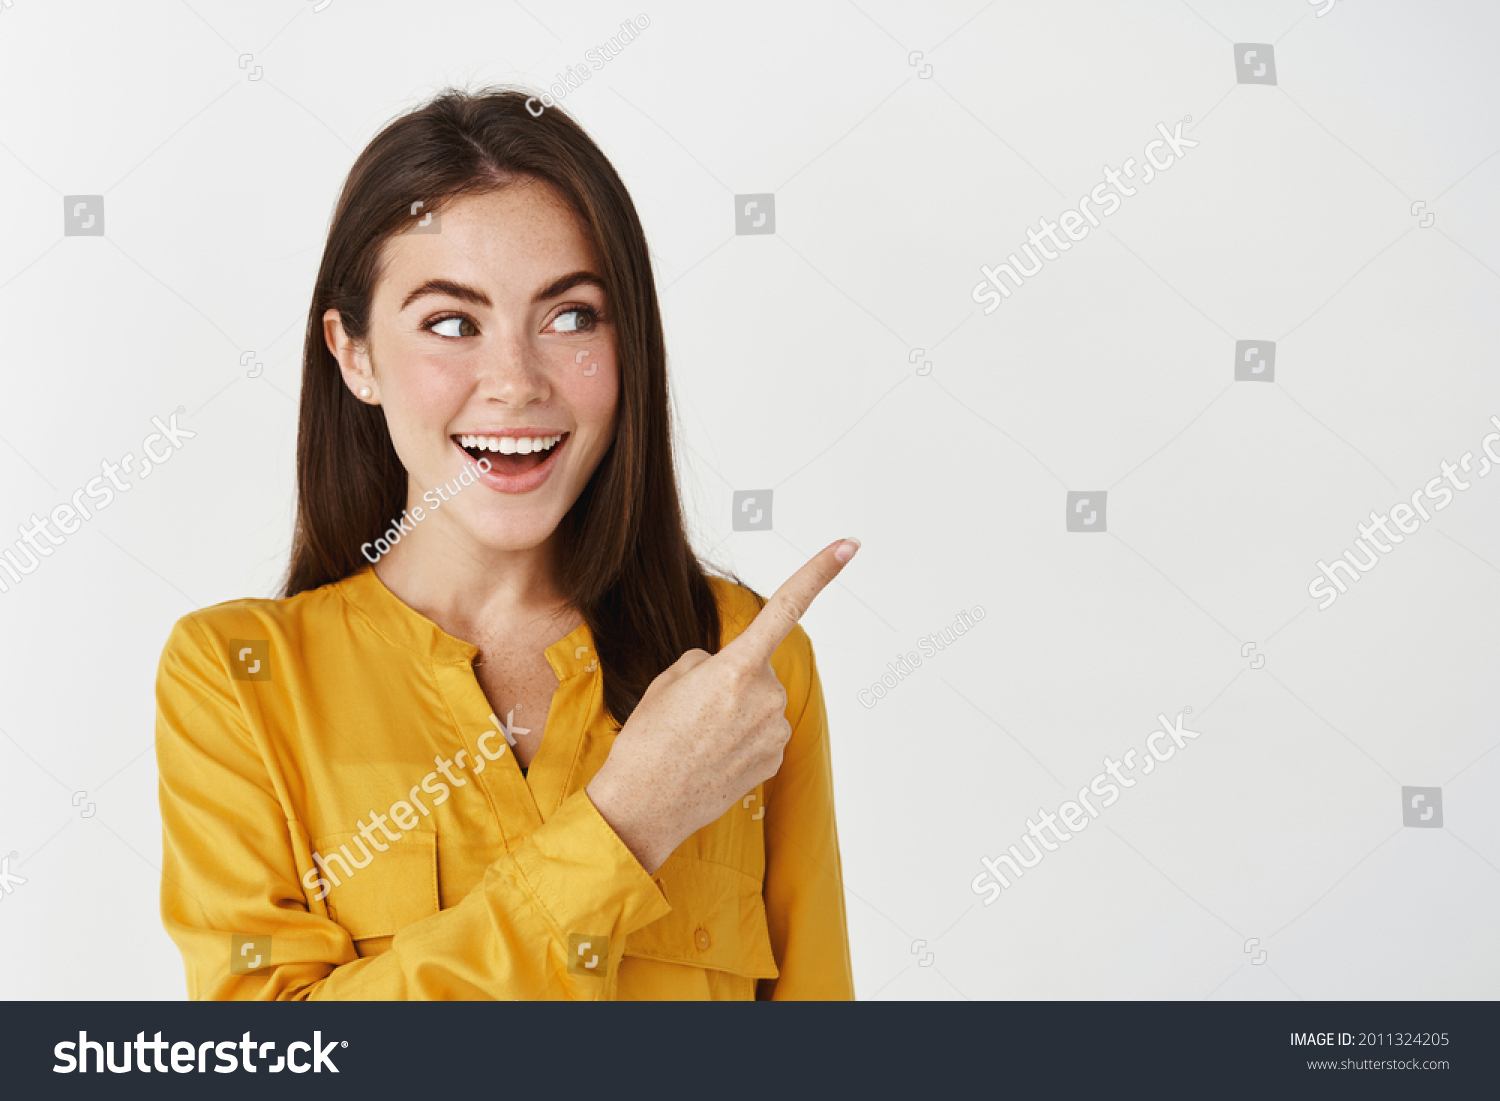 Close-up of lady smiling, pointing and looking right with surprised face, standing on white background #2011324205